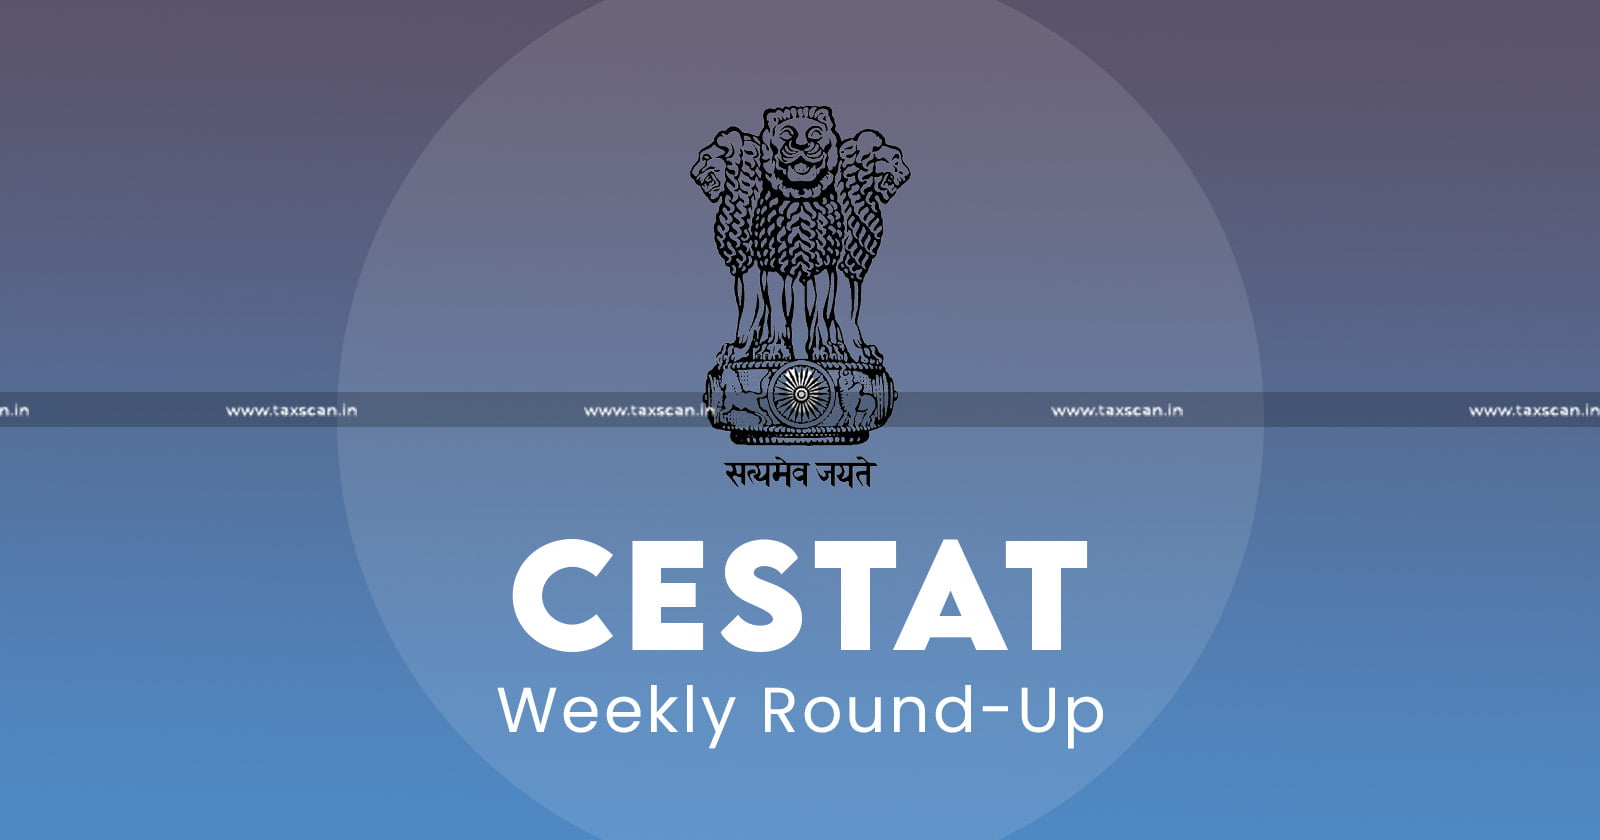 CESTAT-Weekely-Roundup-CESTAT-Weekly-Round-Up-taxscan